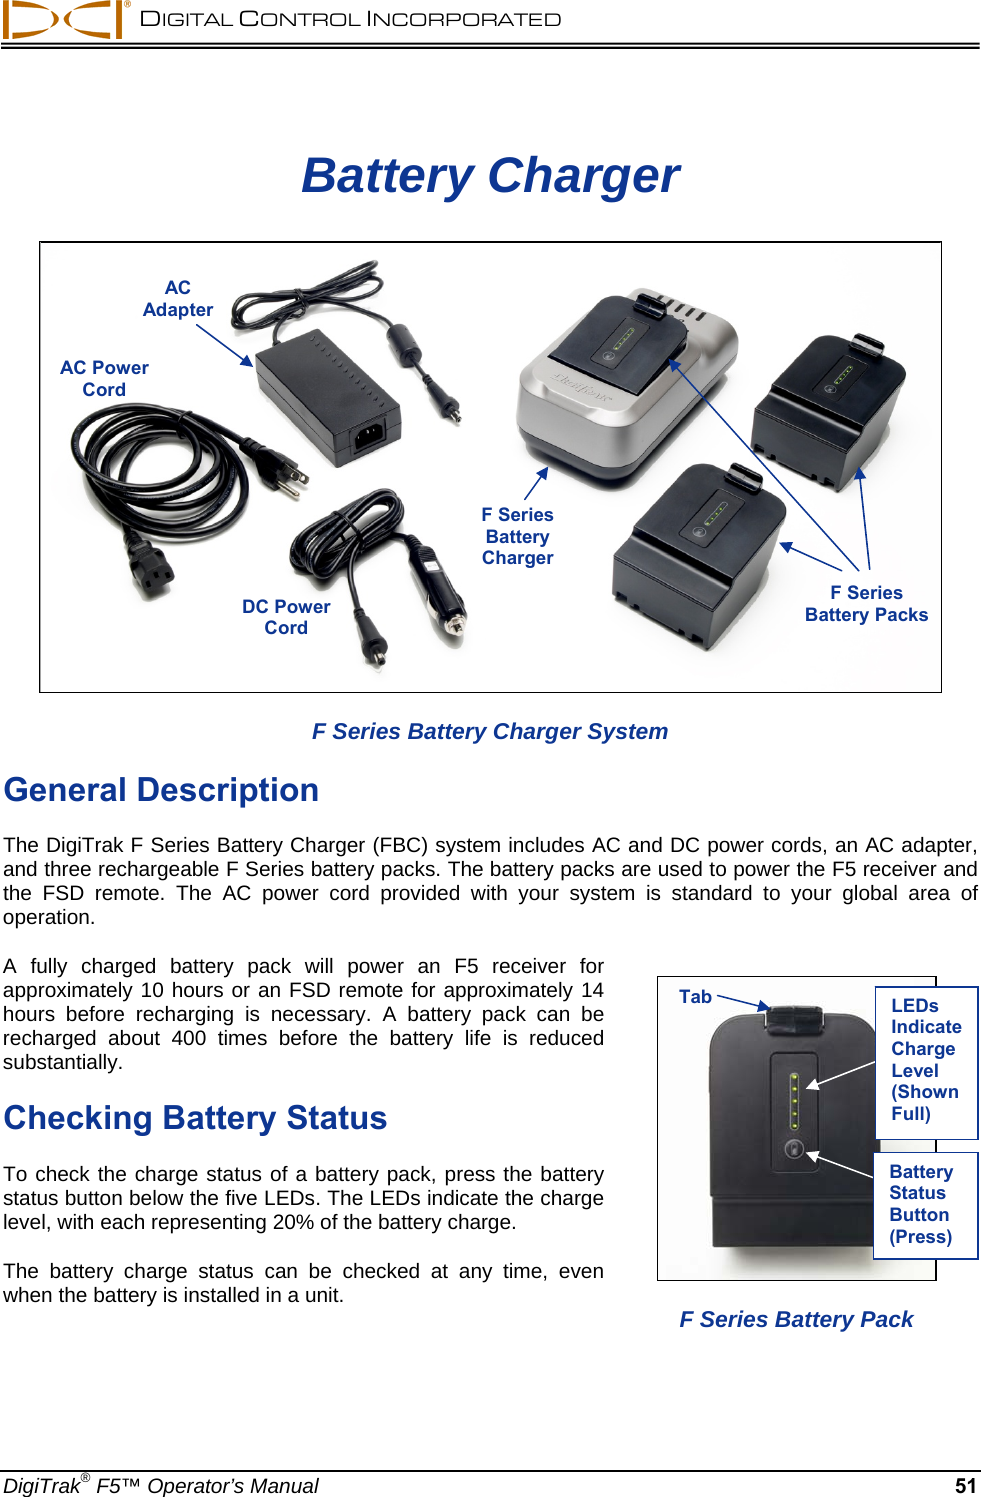  DIGITAL CONTROL INCORPORATED  DigiTrak® F5™ Operator’s Manual 51 Battery Charger  F Series Battery Charger System General Description The DigiTrak F Series Battery Charger (FBC) system includes AC and DC power cords, an AC adapter, and three rechargeable F Series battery packs. The battery packs are used to power the F5 receiver and the FSD remote. The AC power cord provided with your system is standard to your global area of operation. A fully charged battery pack will power an F5 receiver for approximately 10 hours or an FSD remote for approximately 14 hours before recharging is necessary. A battery pack can be recharged about 400 times before the battery life is reduced substantially. Checking Battery Status To check the charge status of a battery pack, press the battery status button below the five LEDs. The LEDs indicate the charge level, with each representing 20% of the battery charge.  The battery charge status can be checked at any time, even when the battery is installed in a unit.     AC Adapter AC Power Cord F SeriesBattery Charger F SeriesBattery Packs  DC Power Cord   F Series Battery Pack Tab LEDs Indicate Charge Level (Shown Full) Battery Status Button (Press) 